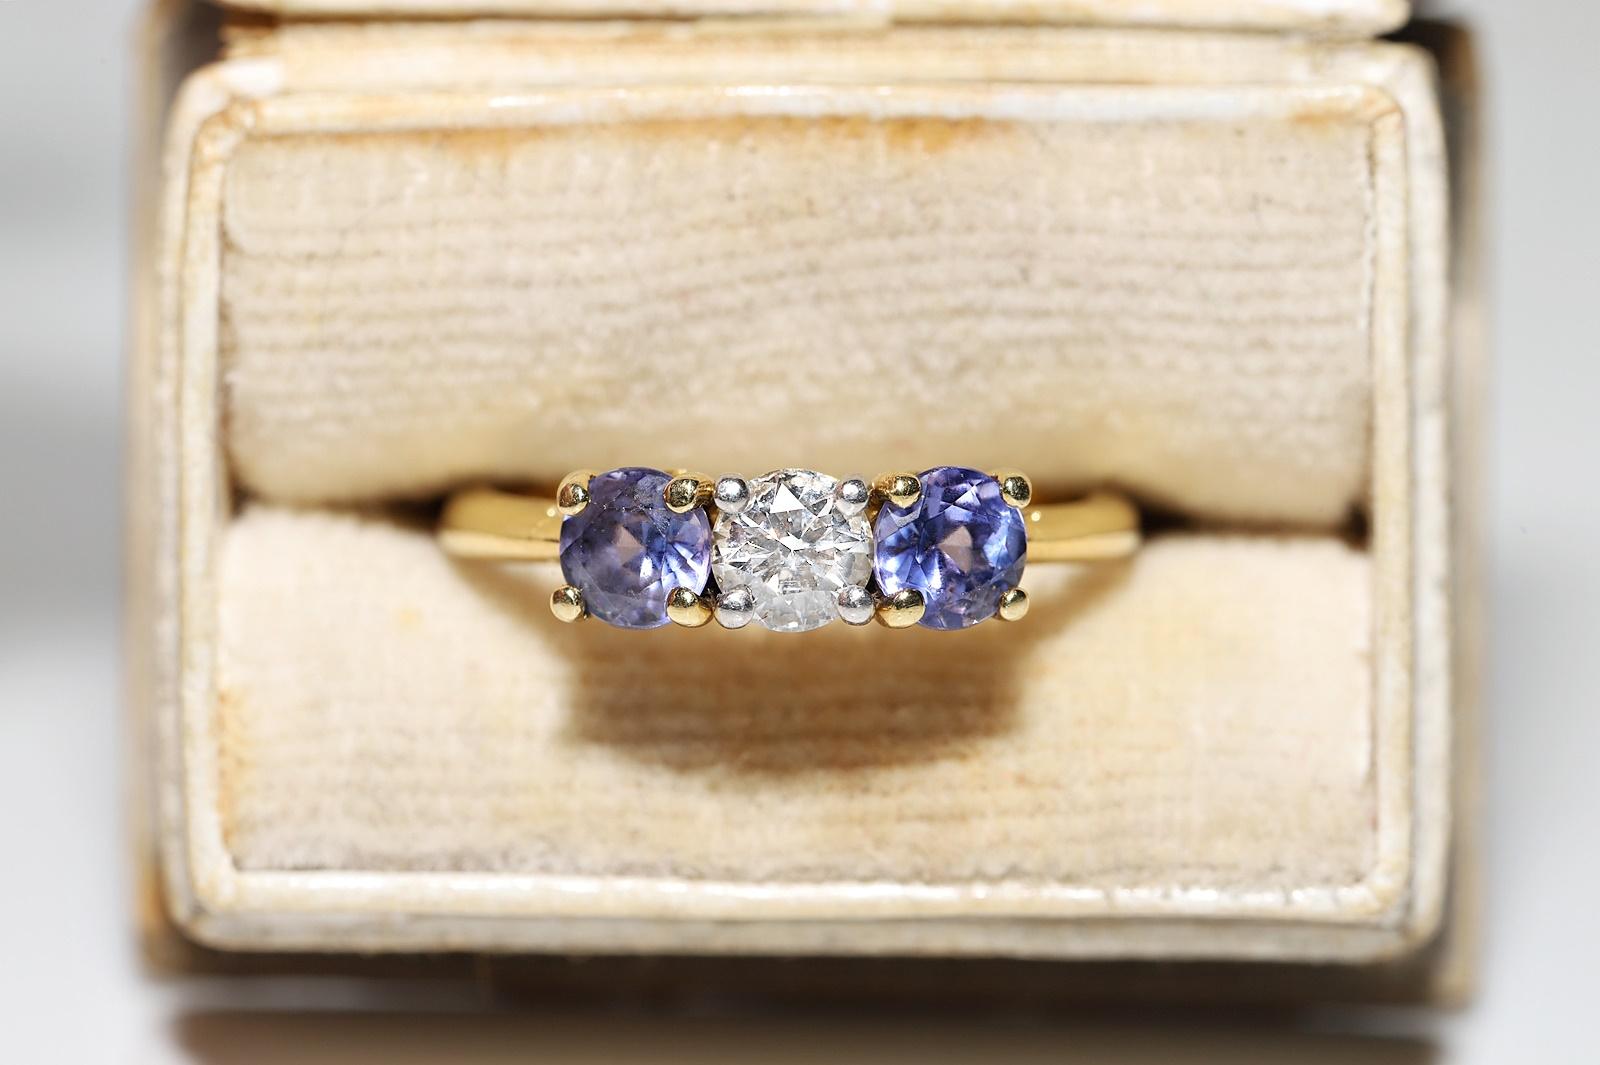 In very good condition.
Total weight is 3.2 grams.
Totally is diamond 0.20 ct.
Totally is tanzanite 0.45 ct.
The diamond is has G color and vs clarity.
Ring size is US 5.8 (We offer free resizing)
Please contact for any questions.